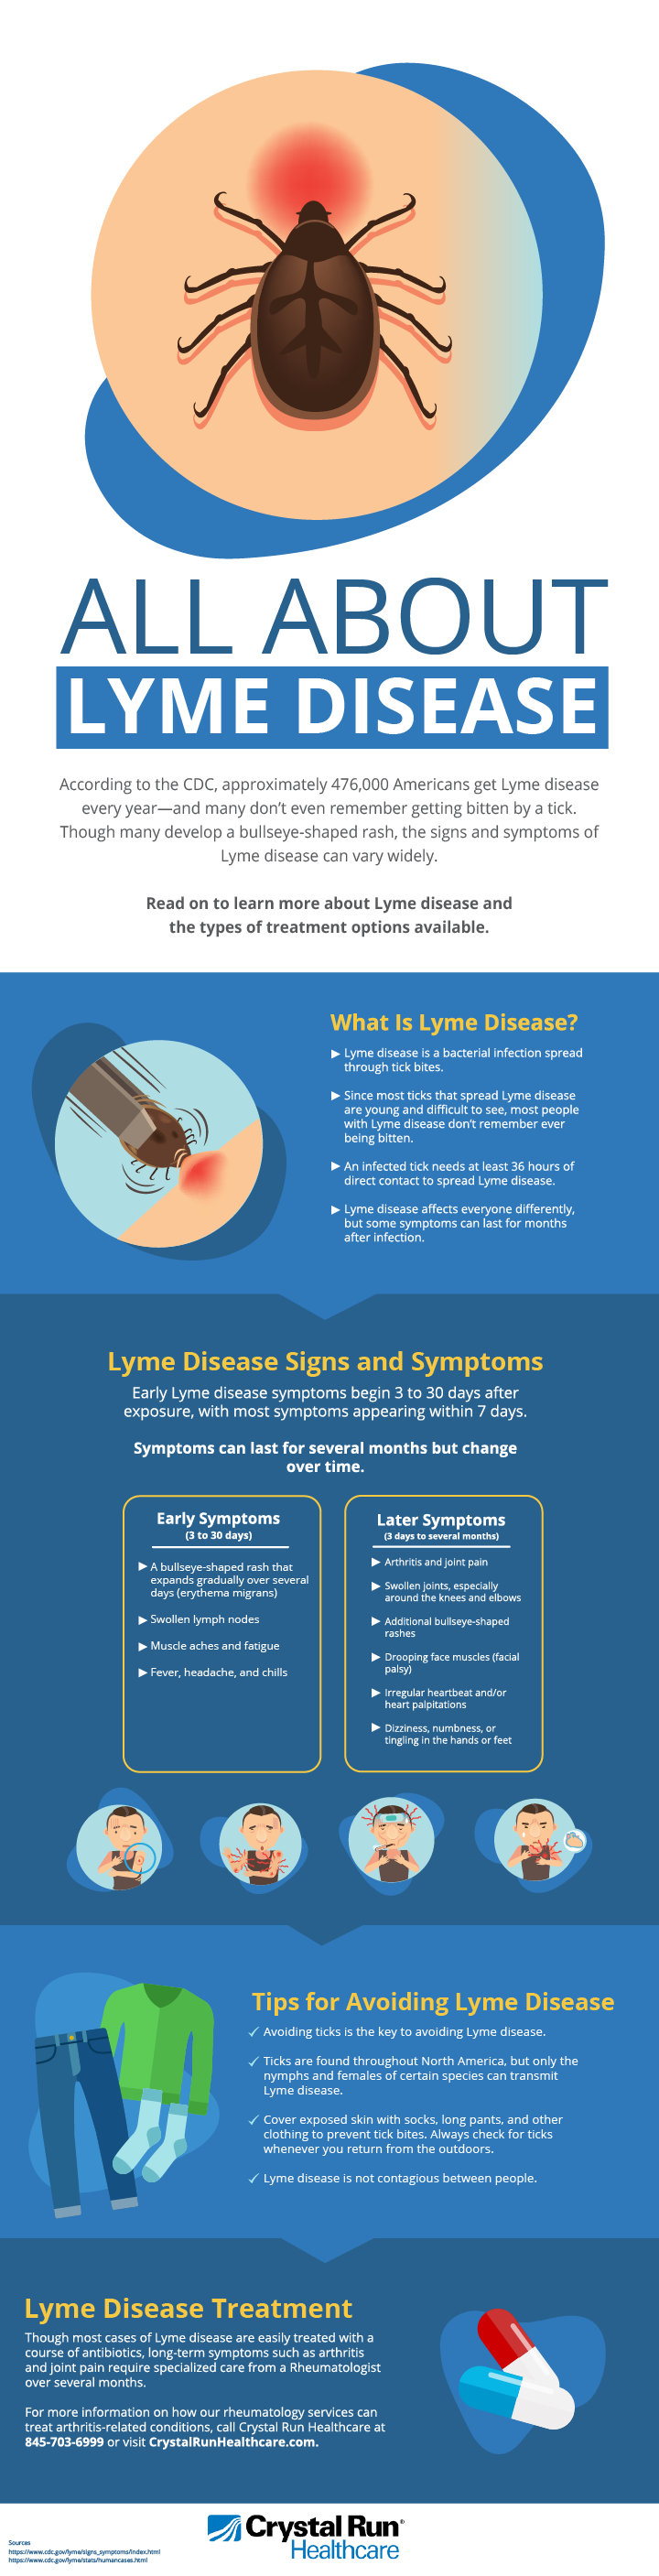 All About Lyme Disease Infographic